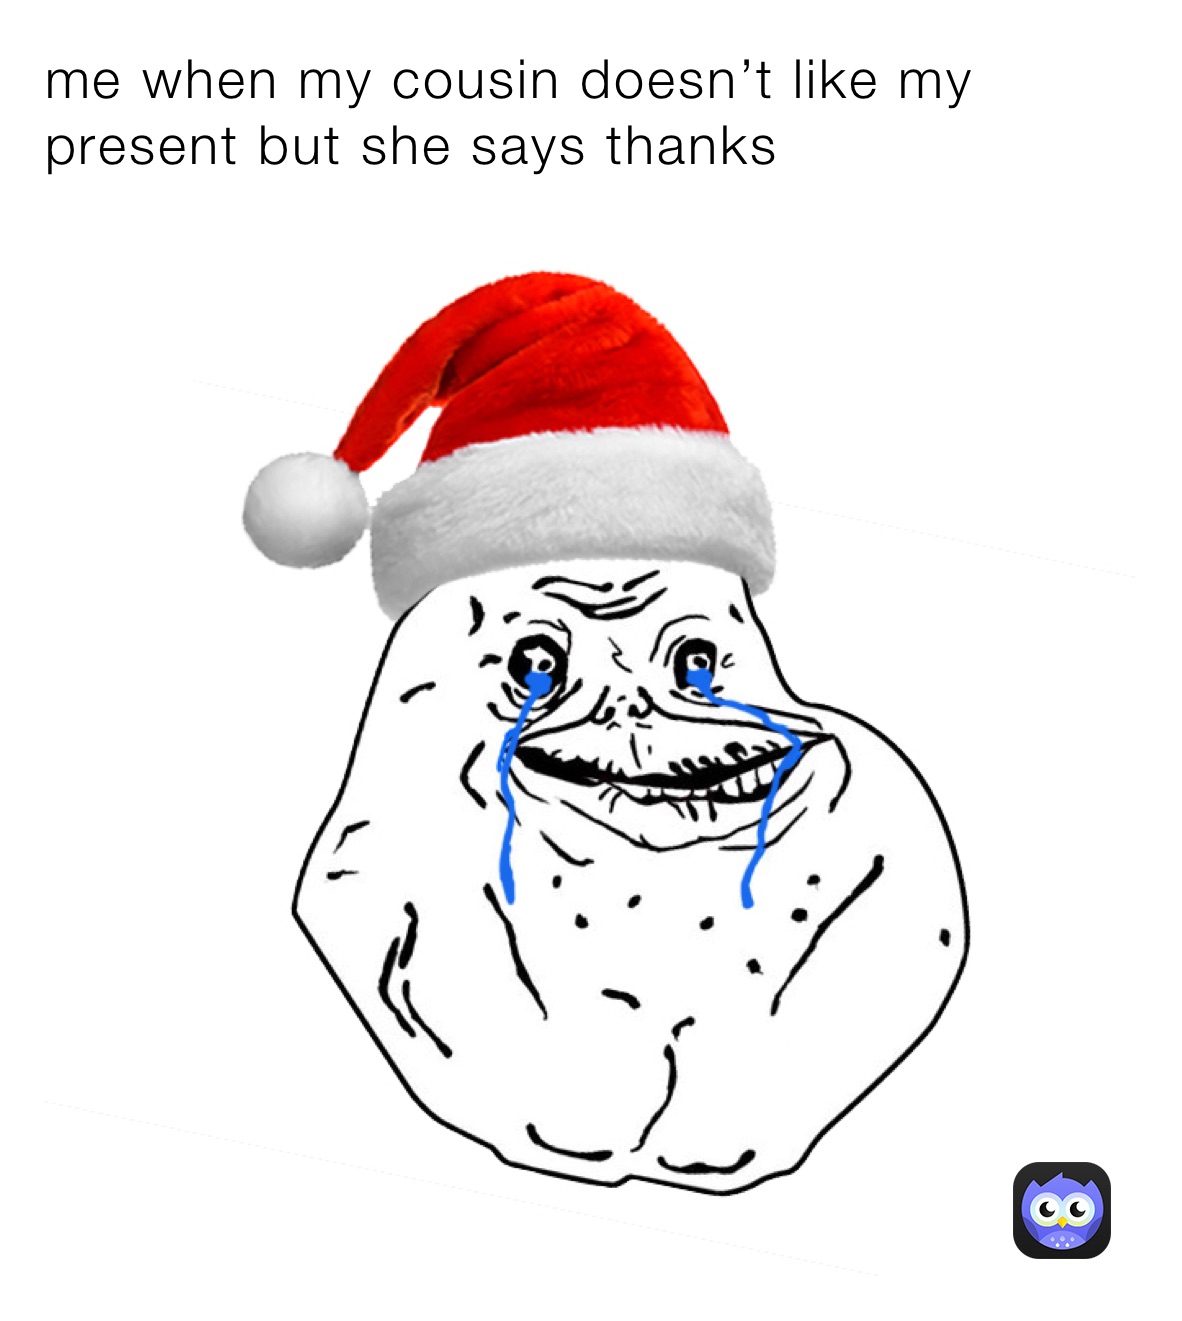 me when my cousin doesn’t like my present but she says thanks